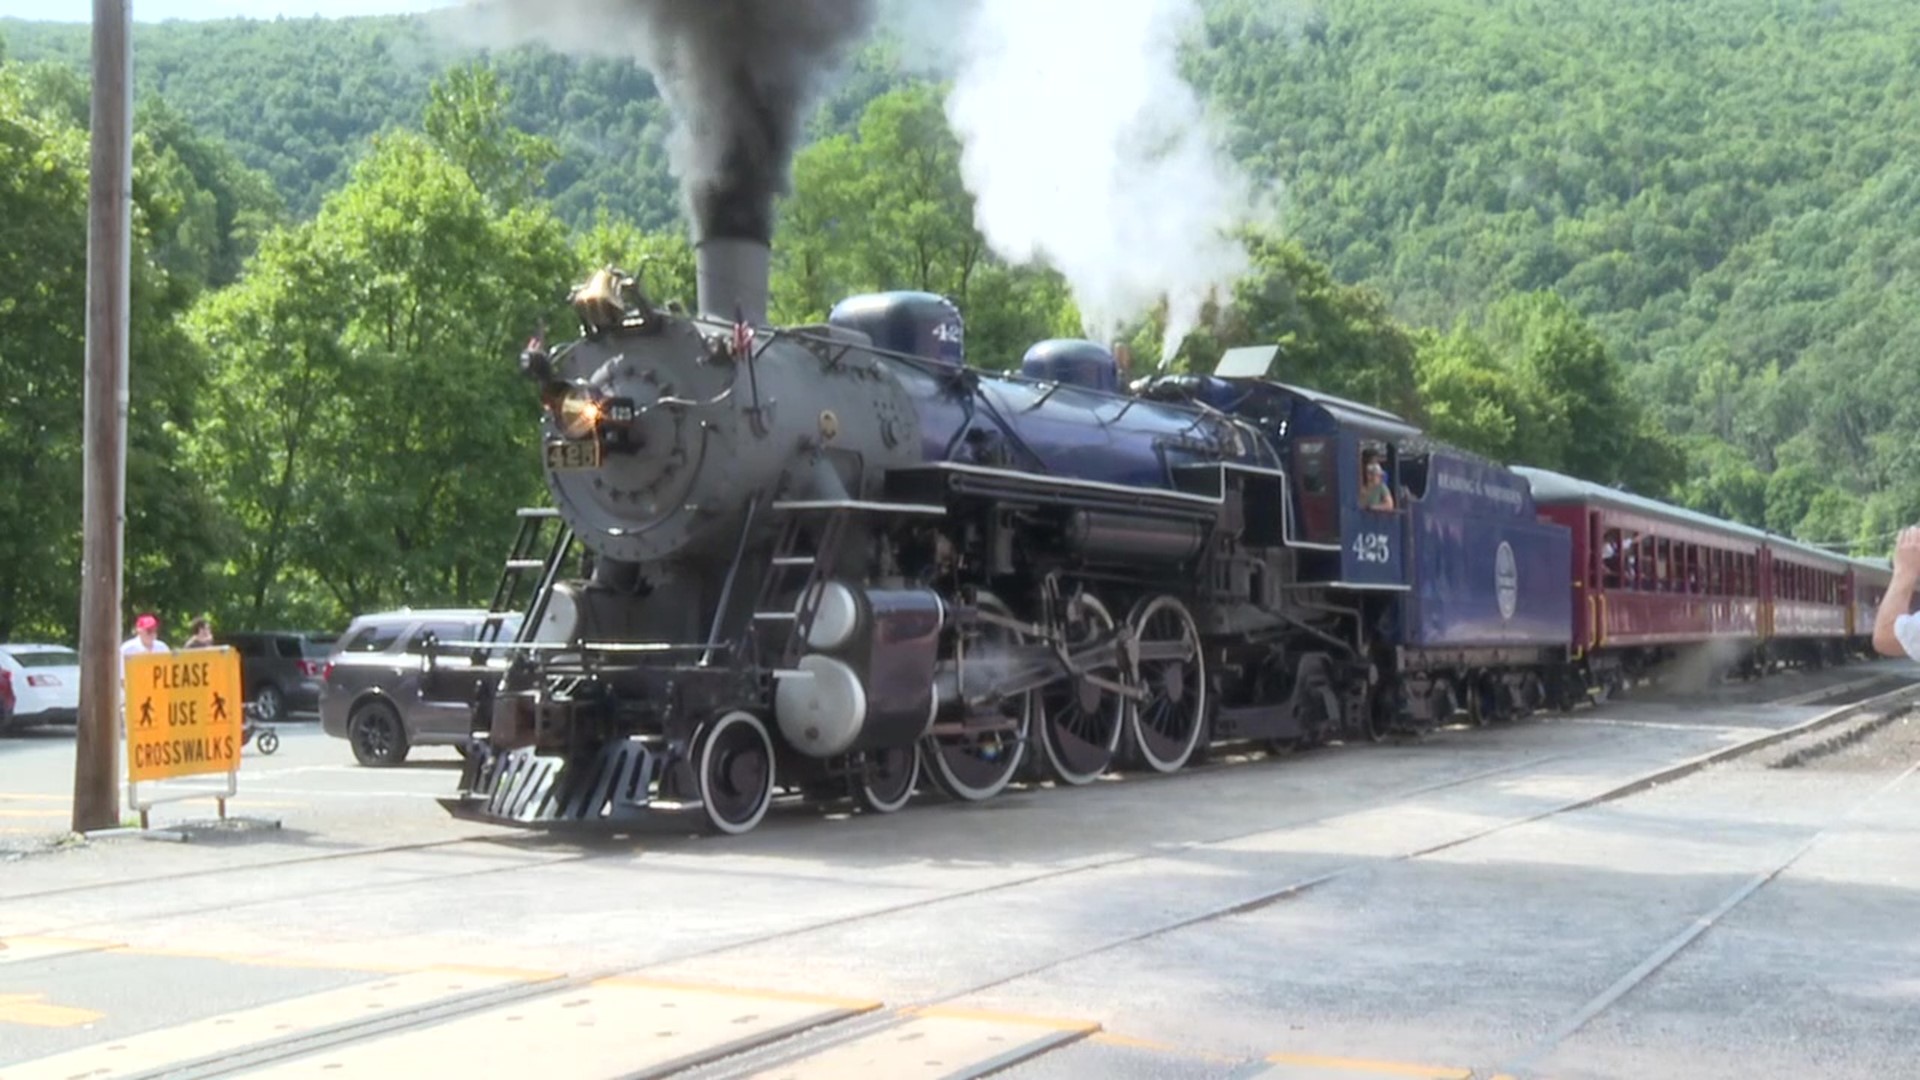 All aboard! Jim Thorpe train rides are back